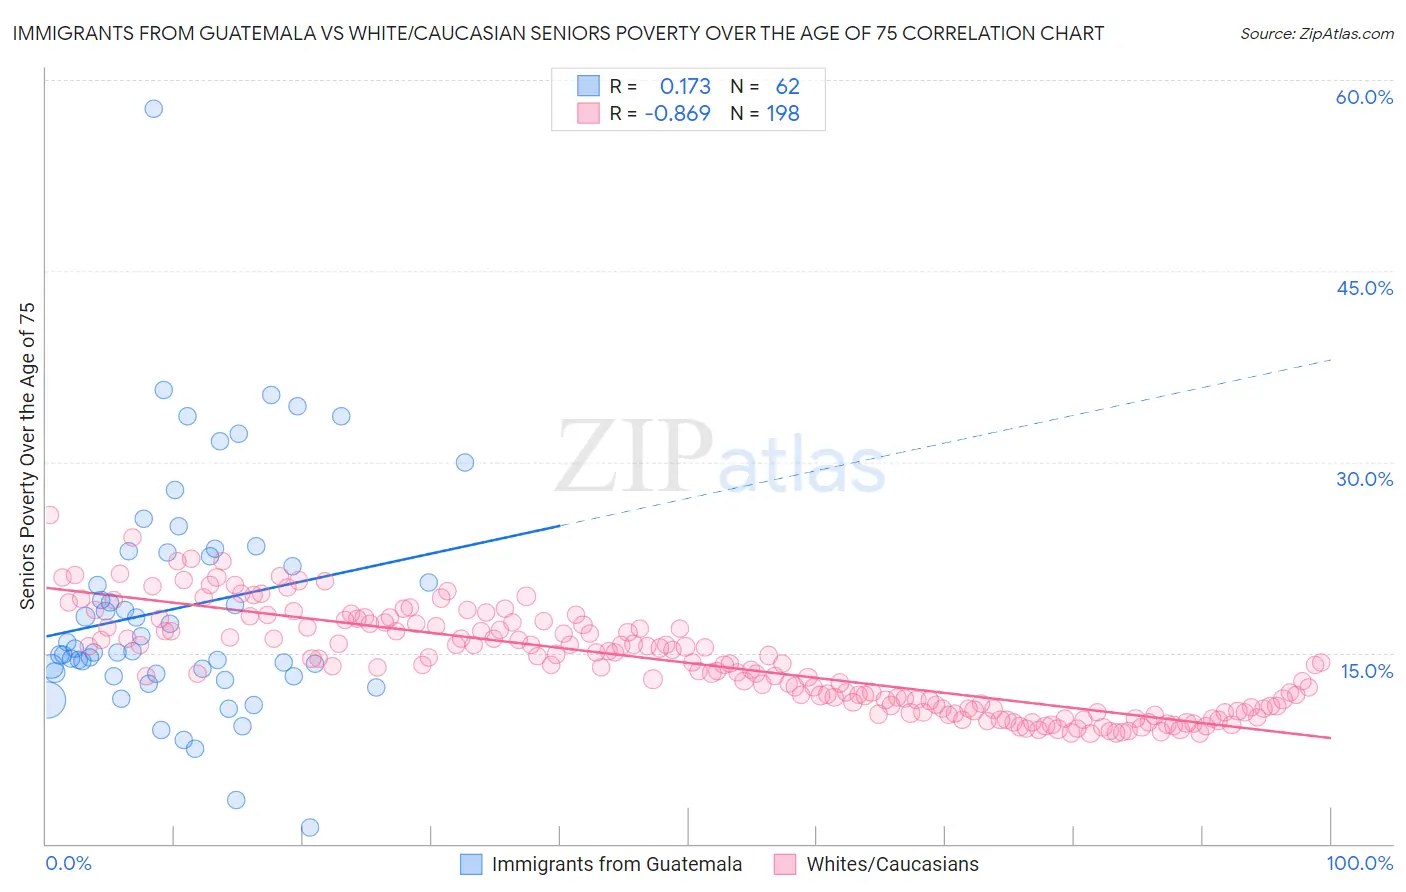 Immigrants from Guatemala vs White/Caucasian Seniors Poverty Over the Age of 75